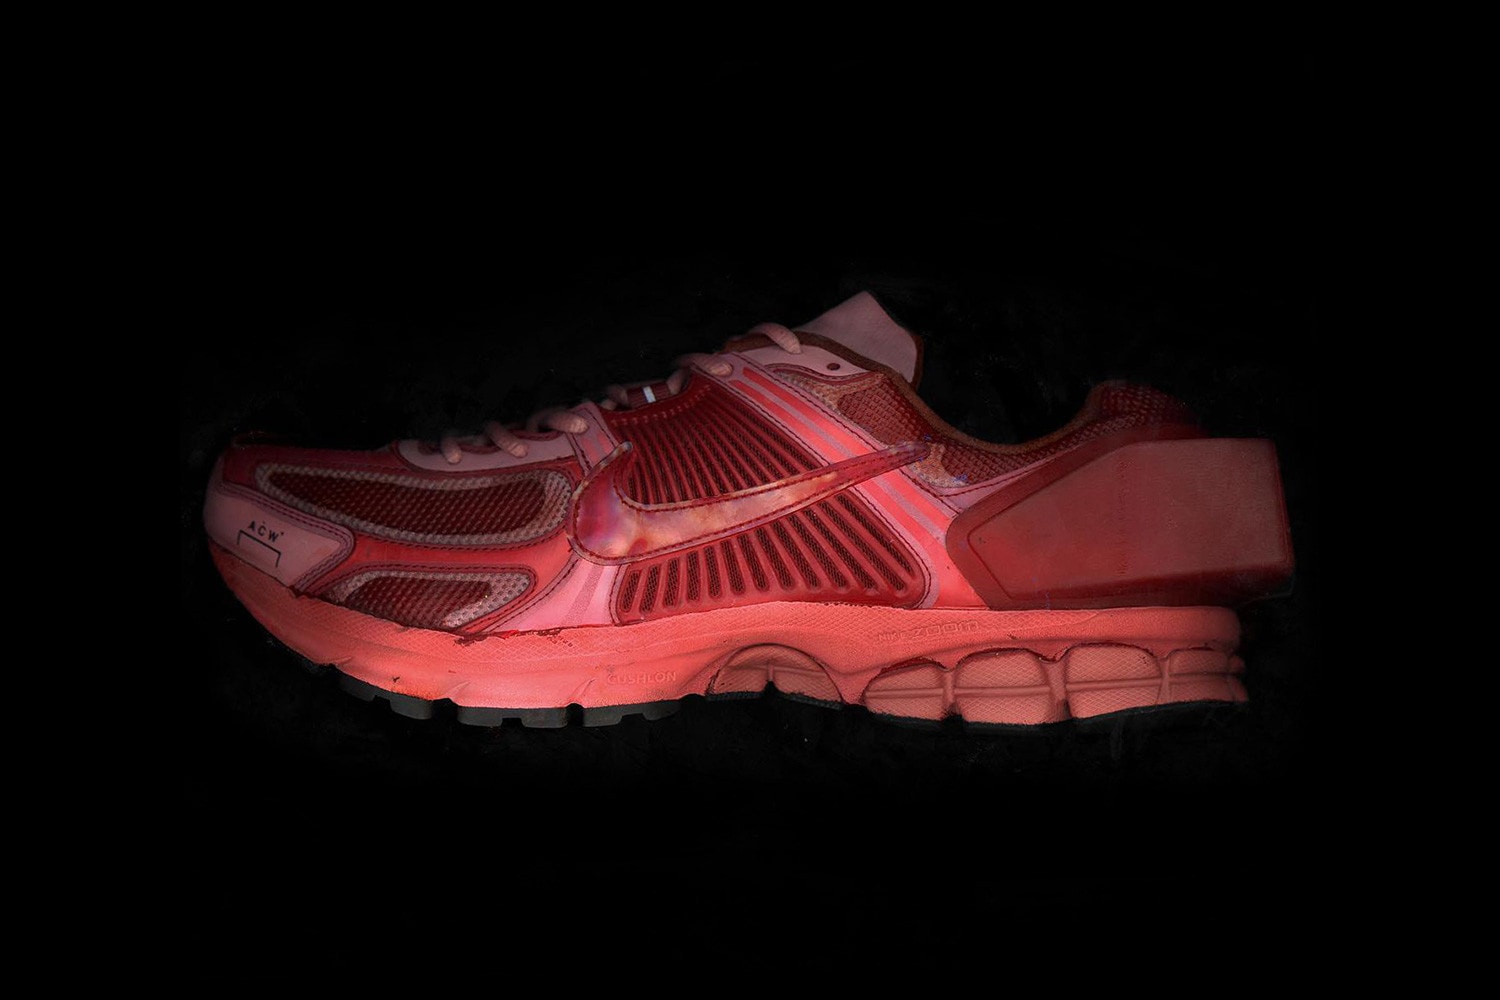 Nike x A-COLD-WALL* Vomero +5 染紅配色追加